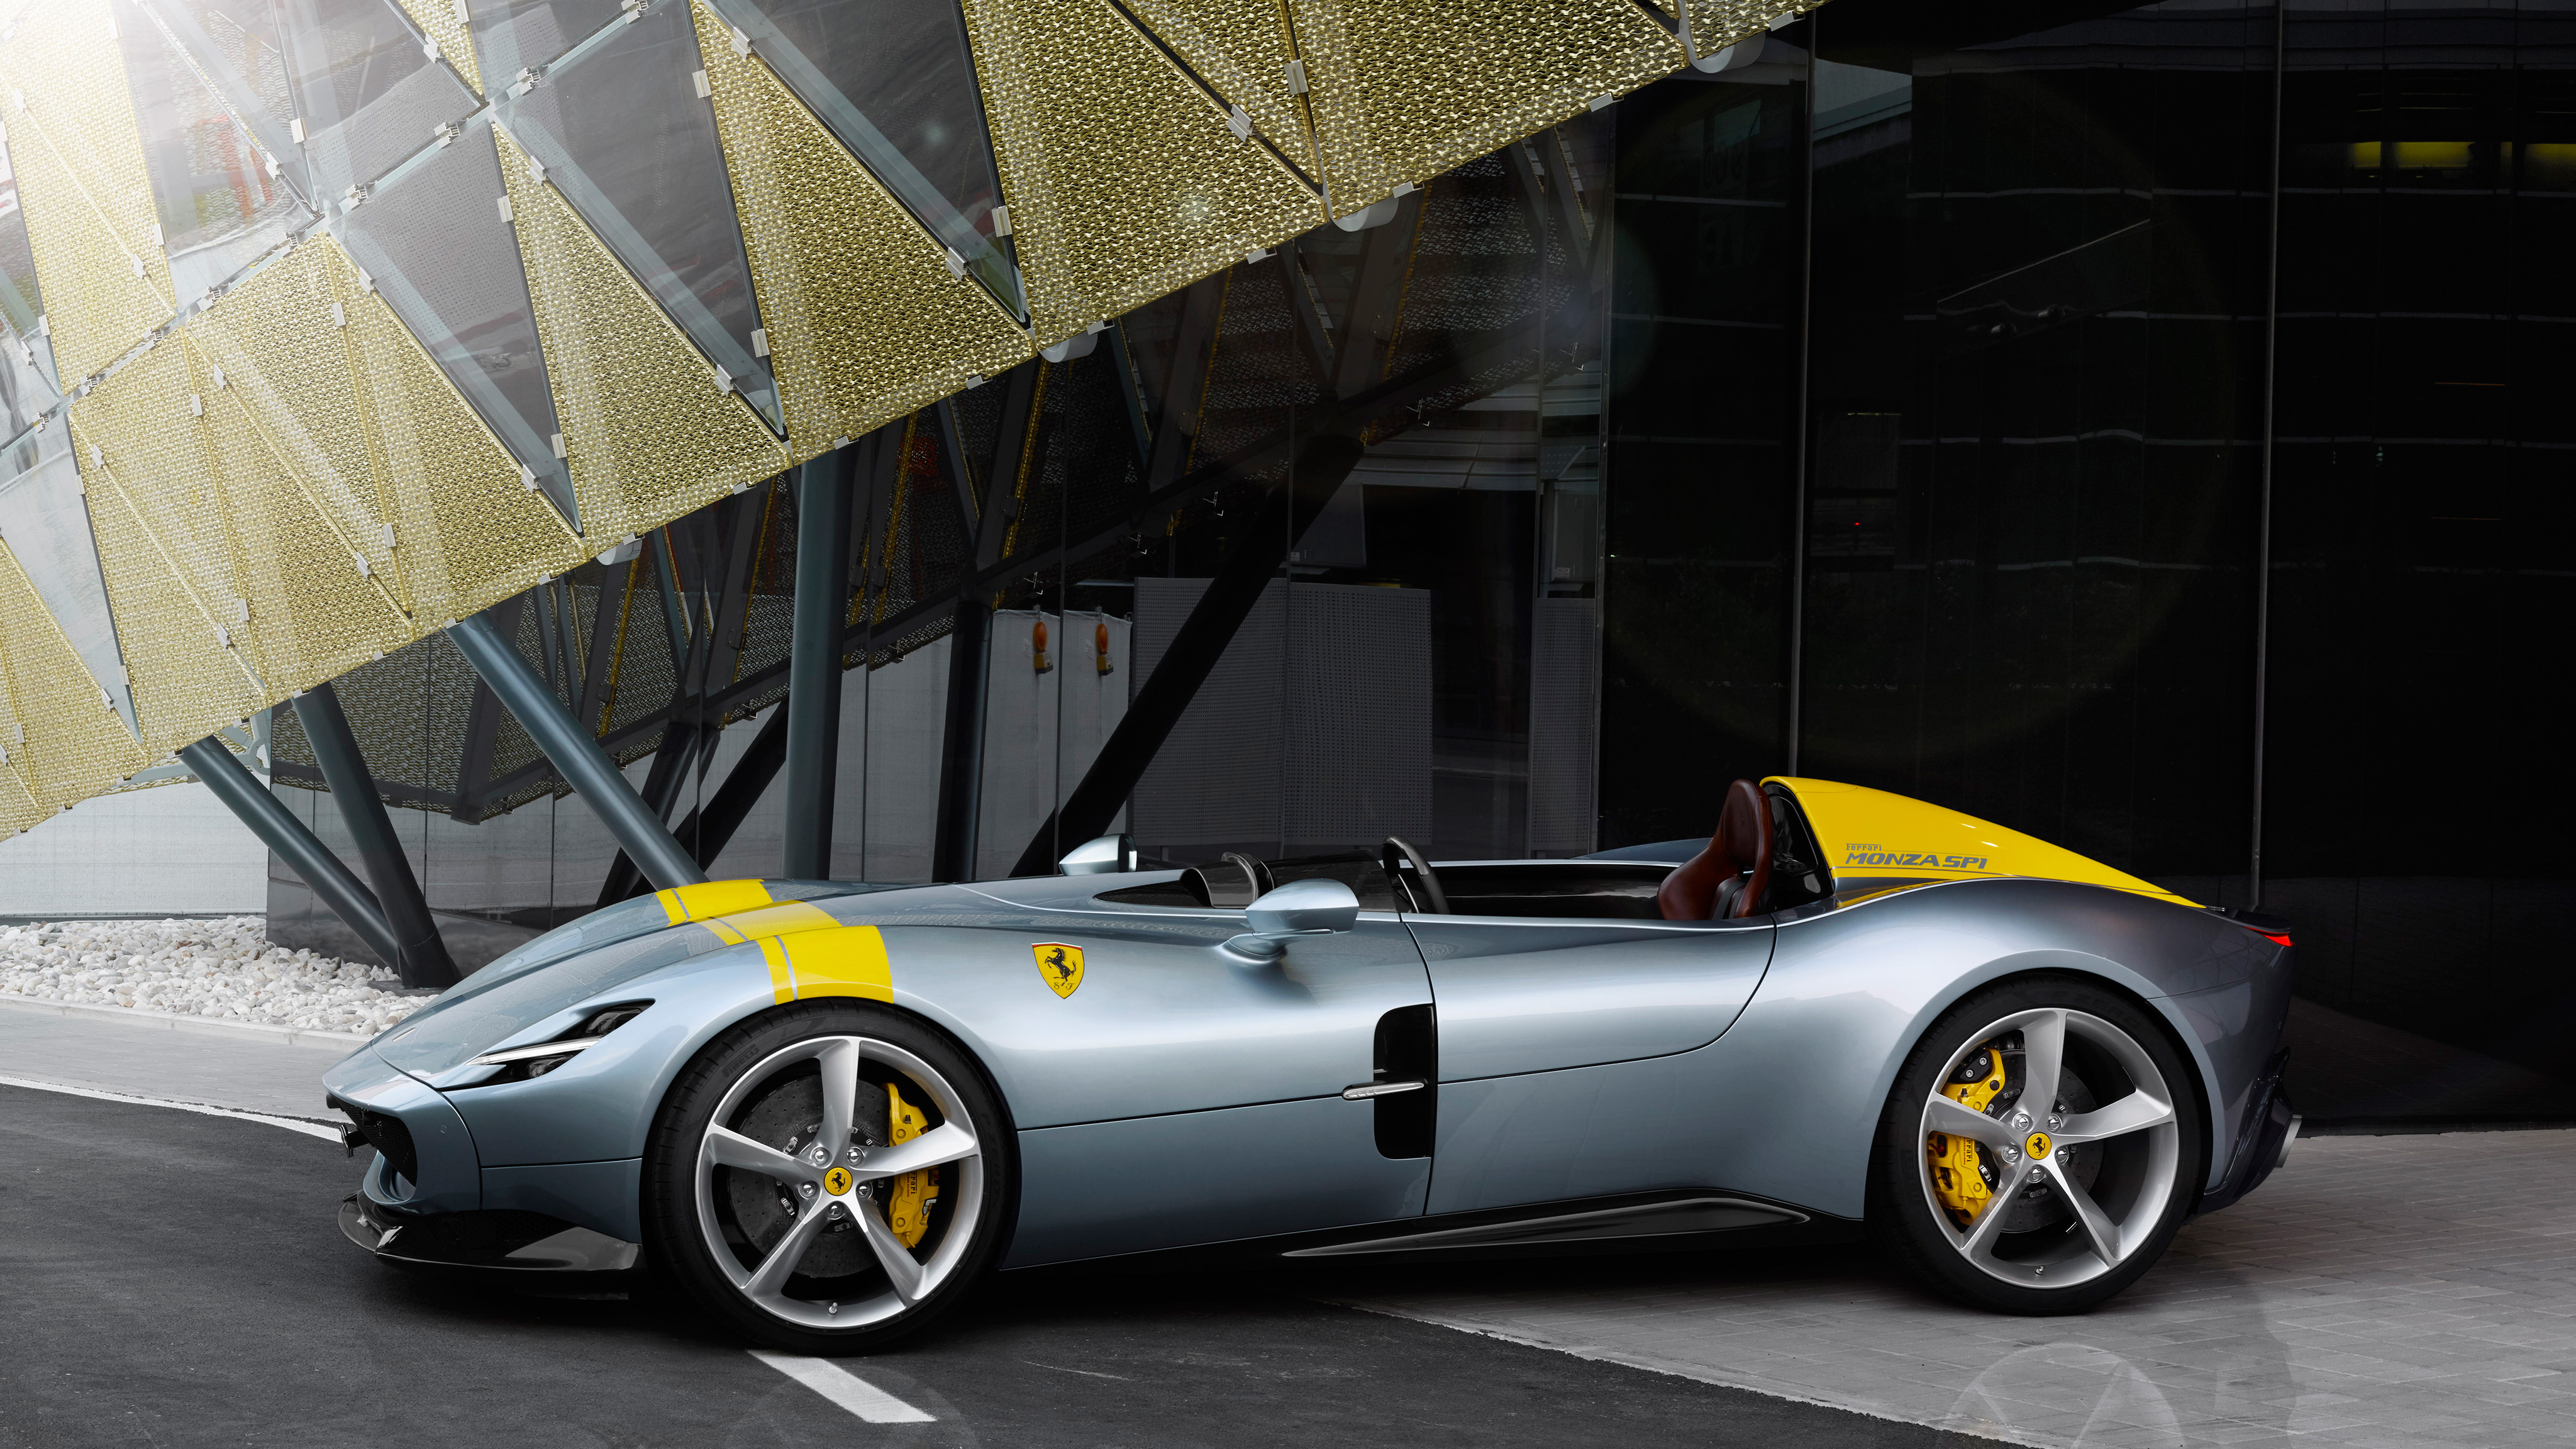 Ferrari Monza SP1 HD Cars, 4k Wallpaper, Image, Background, Photo and Picture